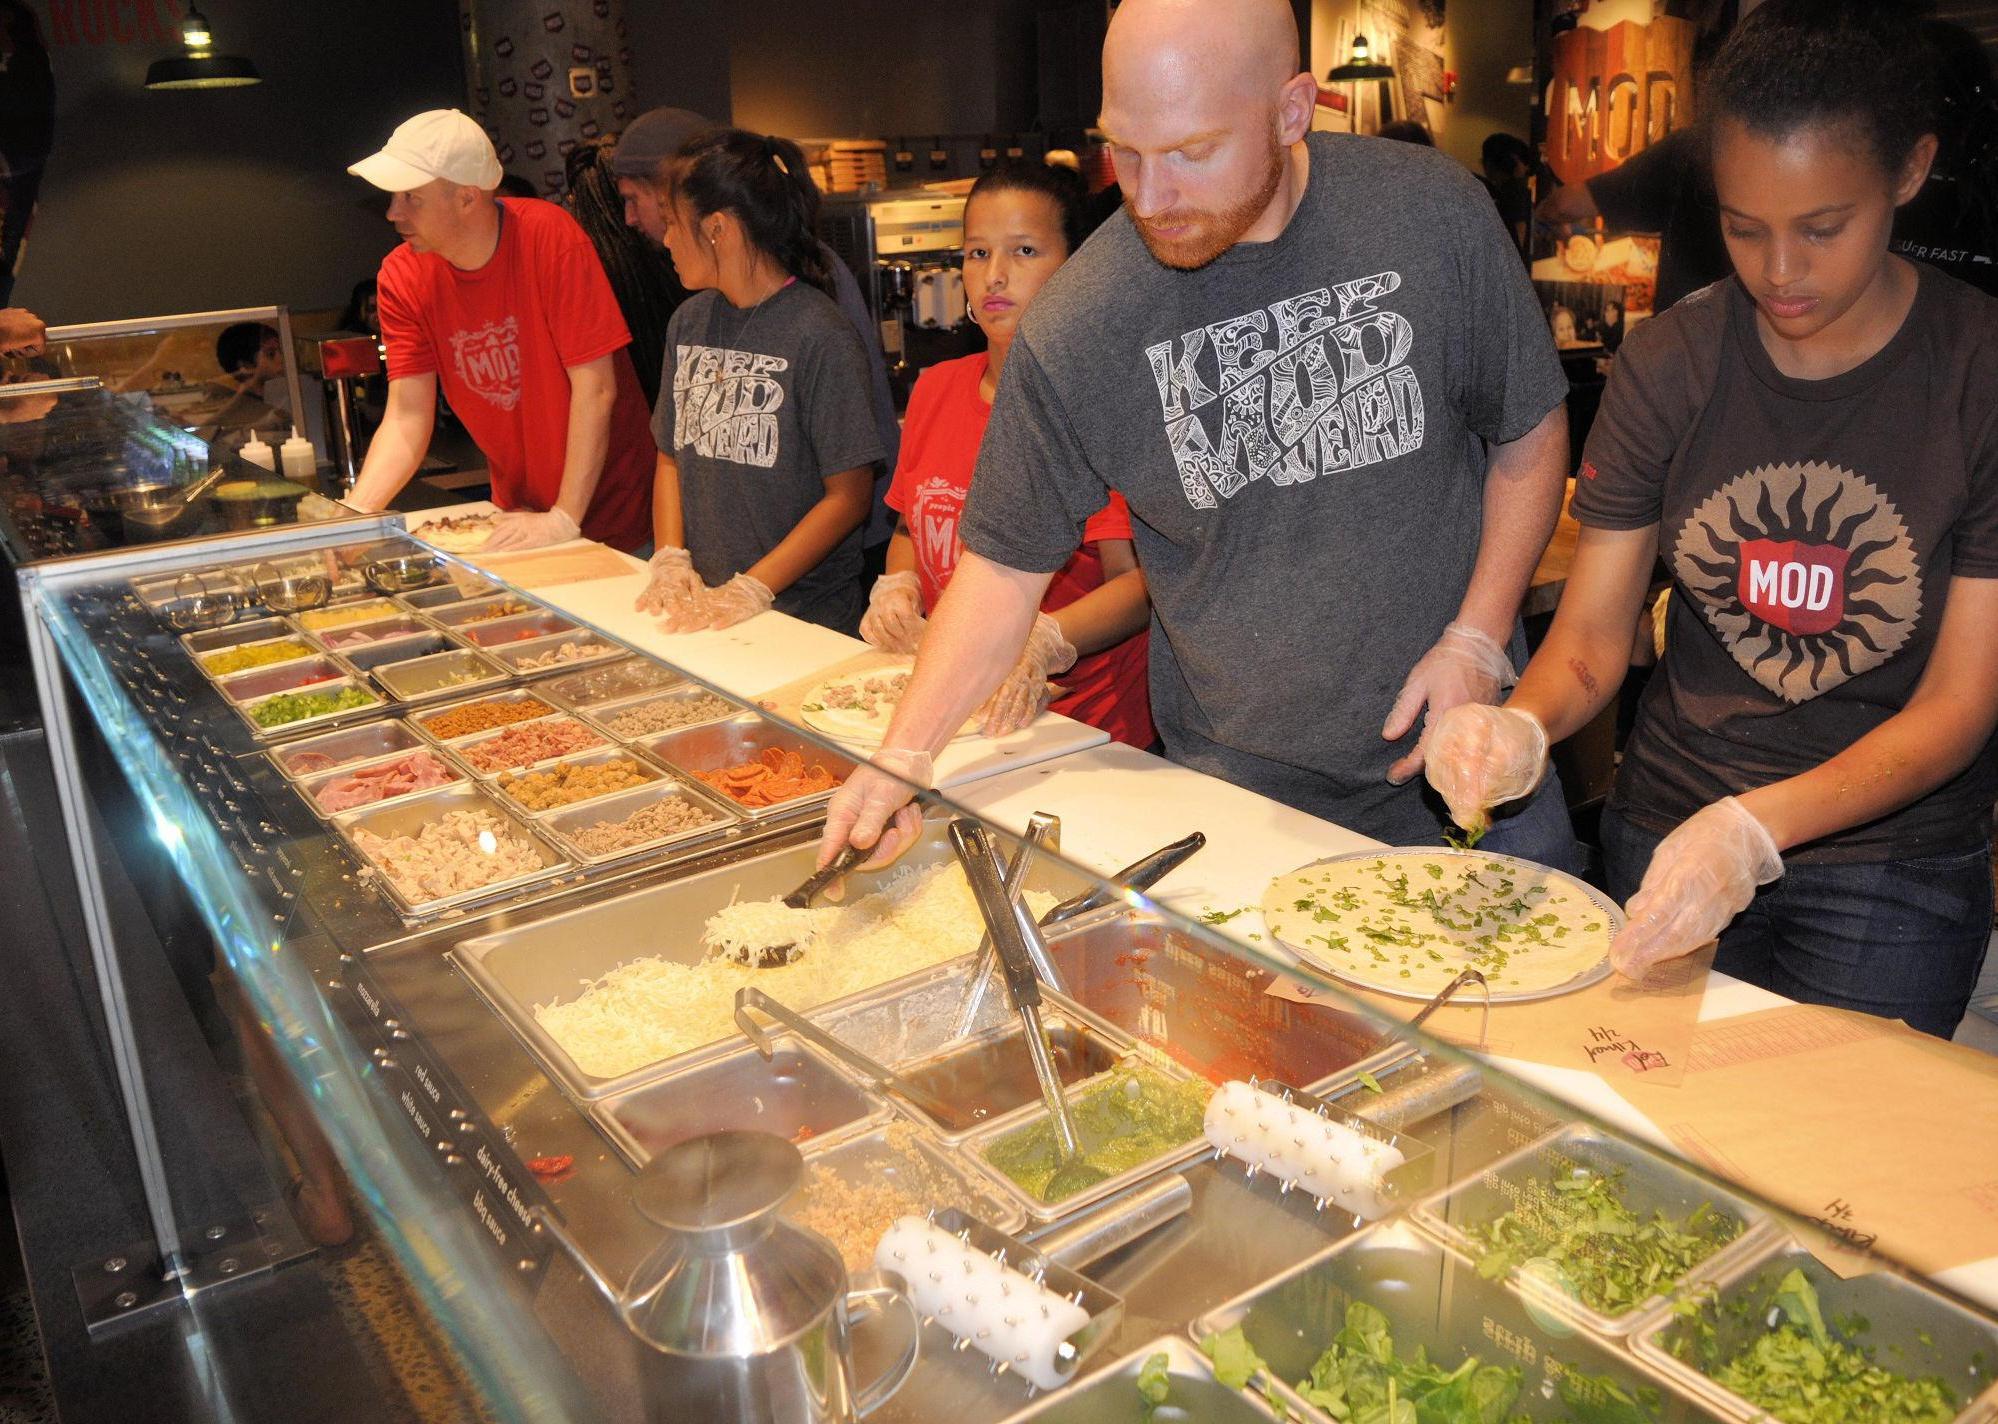 Employees adding ingredients to pizza in a line at Mod.